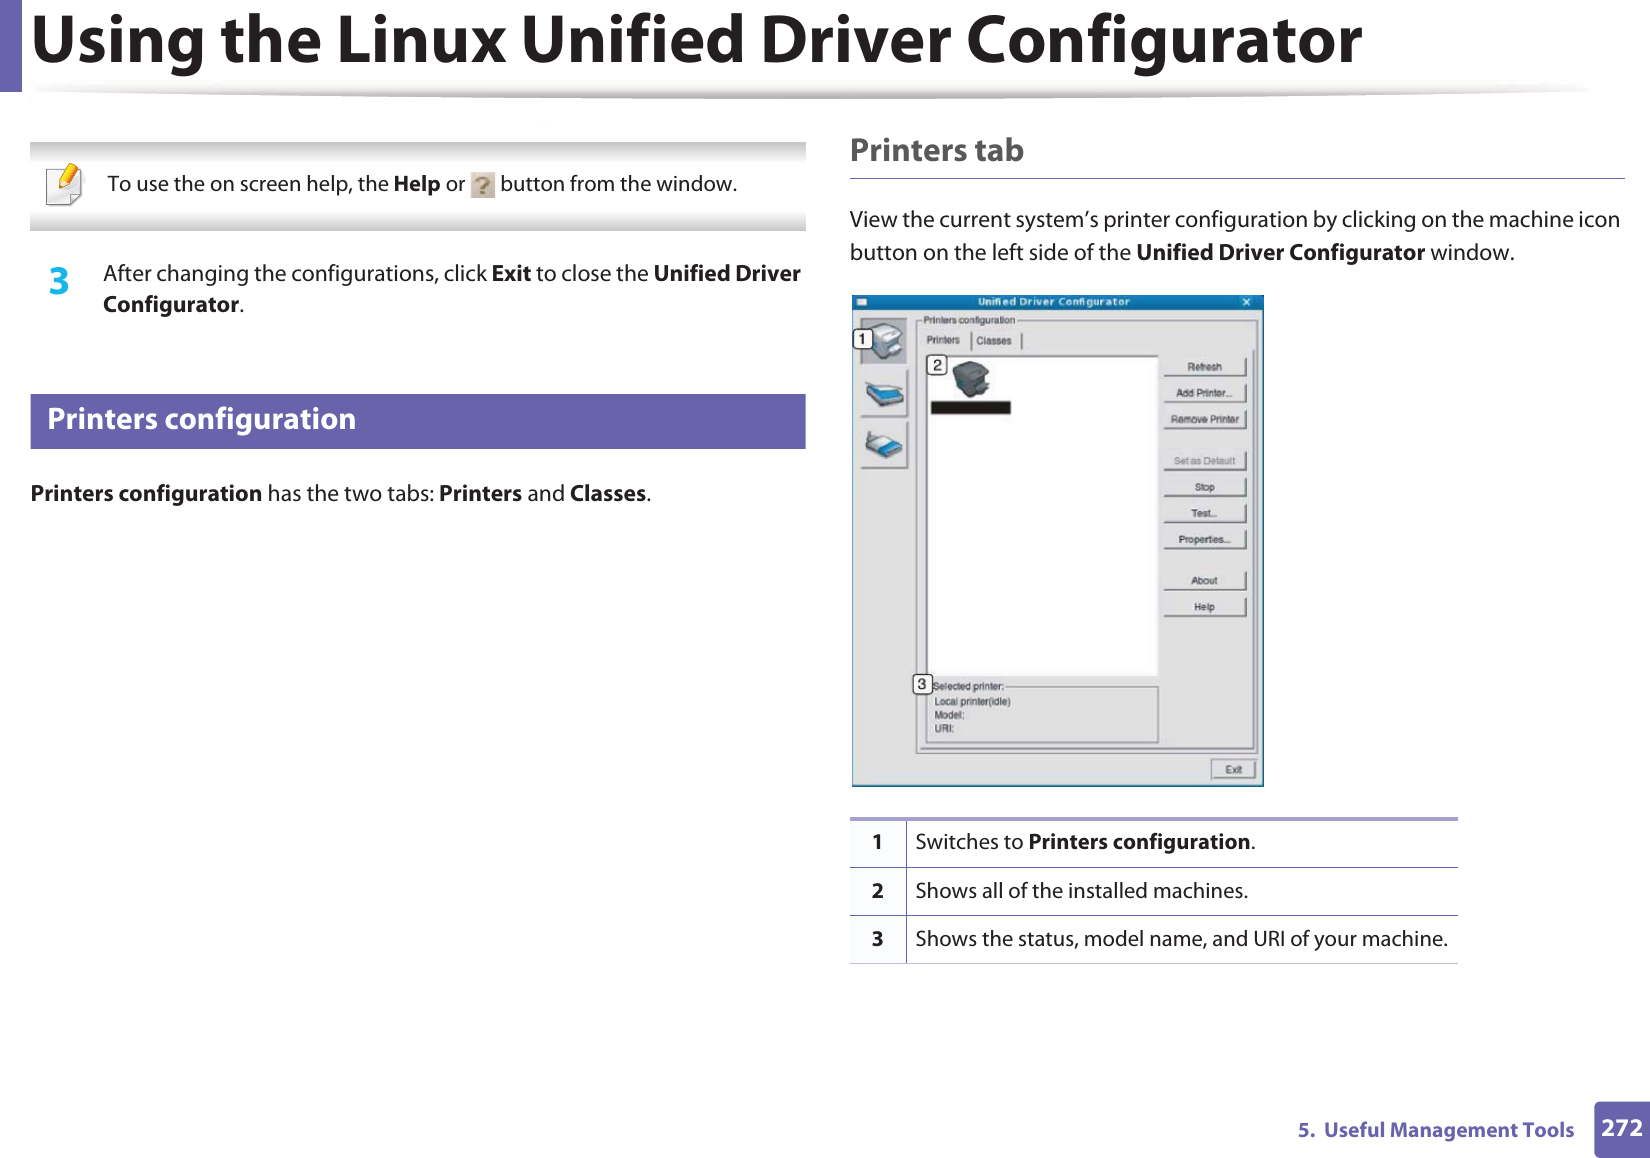 Using the Linux Unified Driver Configurator2725.  Useful Management Tools  To use the on screen help, the Help or   button from the window. 3  After changing the configurations, click Exit to close the Unified Driver Configurator.11 Printers configurationPrinters configuration has the two tabs: Printers and Classes.Printers tabView the current system’s printer configuration by clicking on the machine icon button on the left side of the Unified Driver Configurator window.1Switches to Printers configuration.2Shows all of the installed machines.3Shows the status, model name, and URI of your machine.